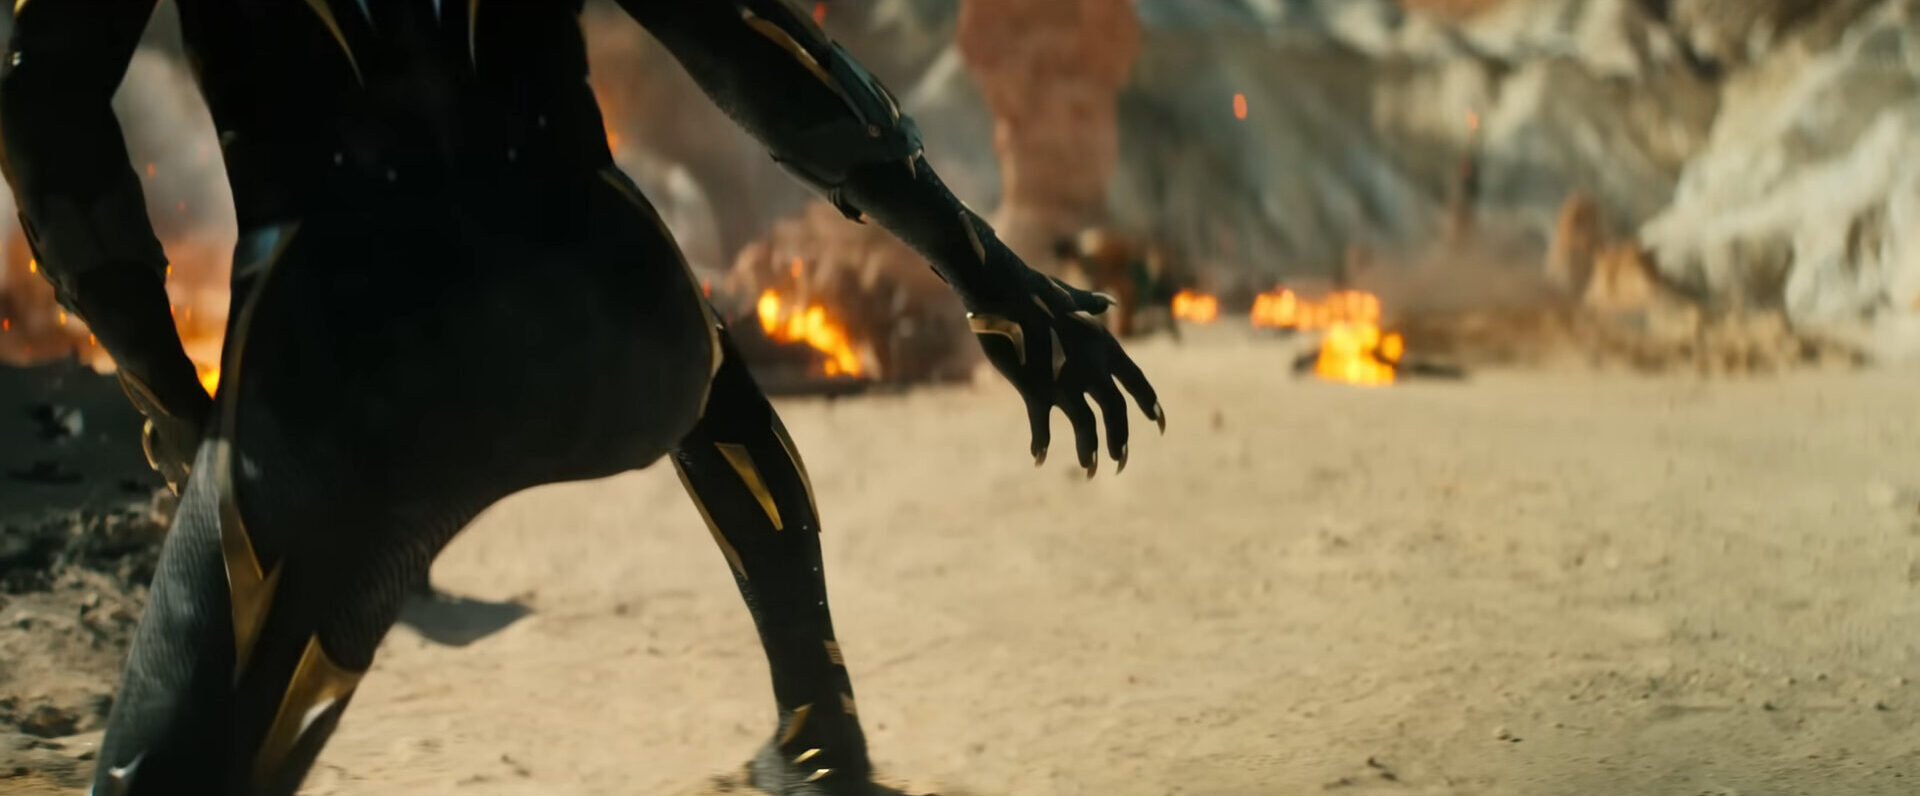 Shuri (Letitia Wright) unfurls her claws in Black Panther: Wakanda Forever (2022), Marvel Entertainment